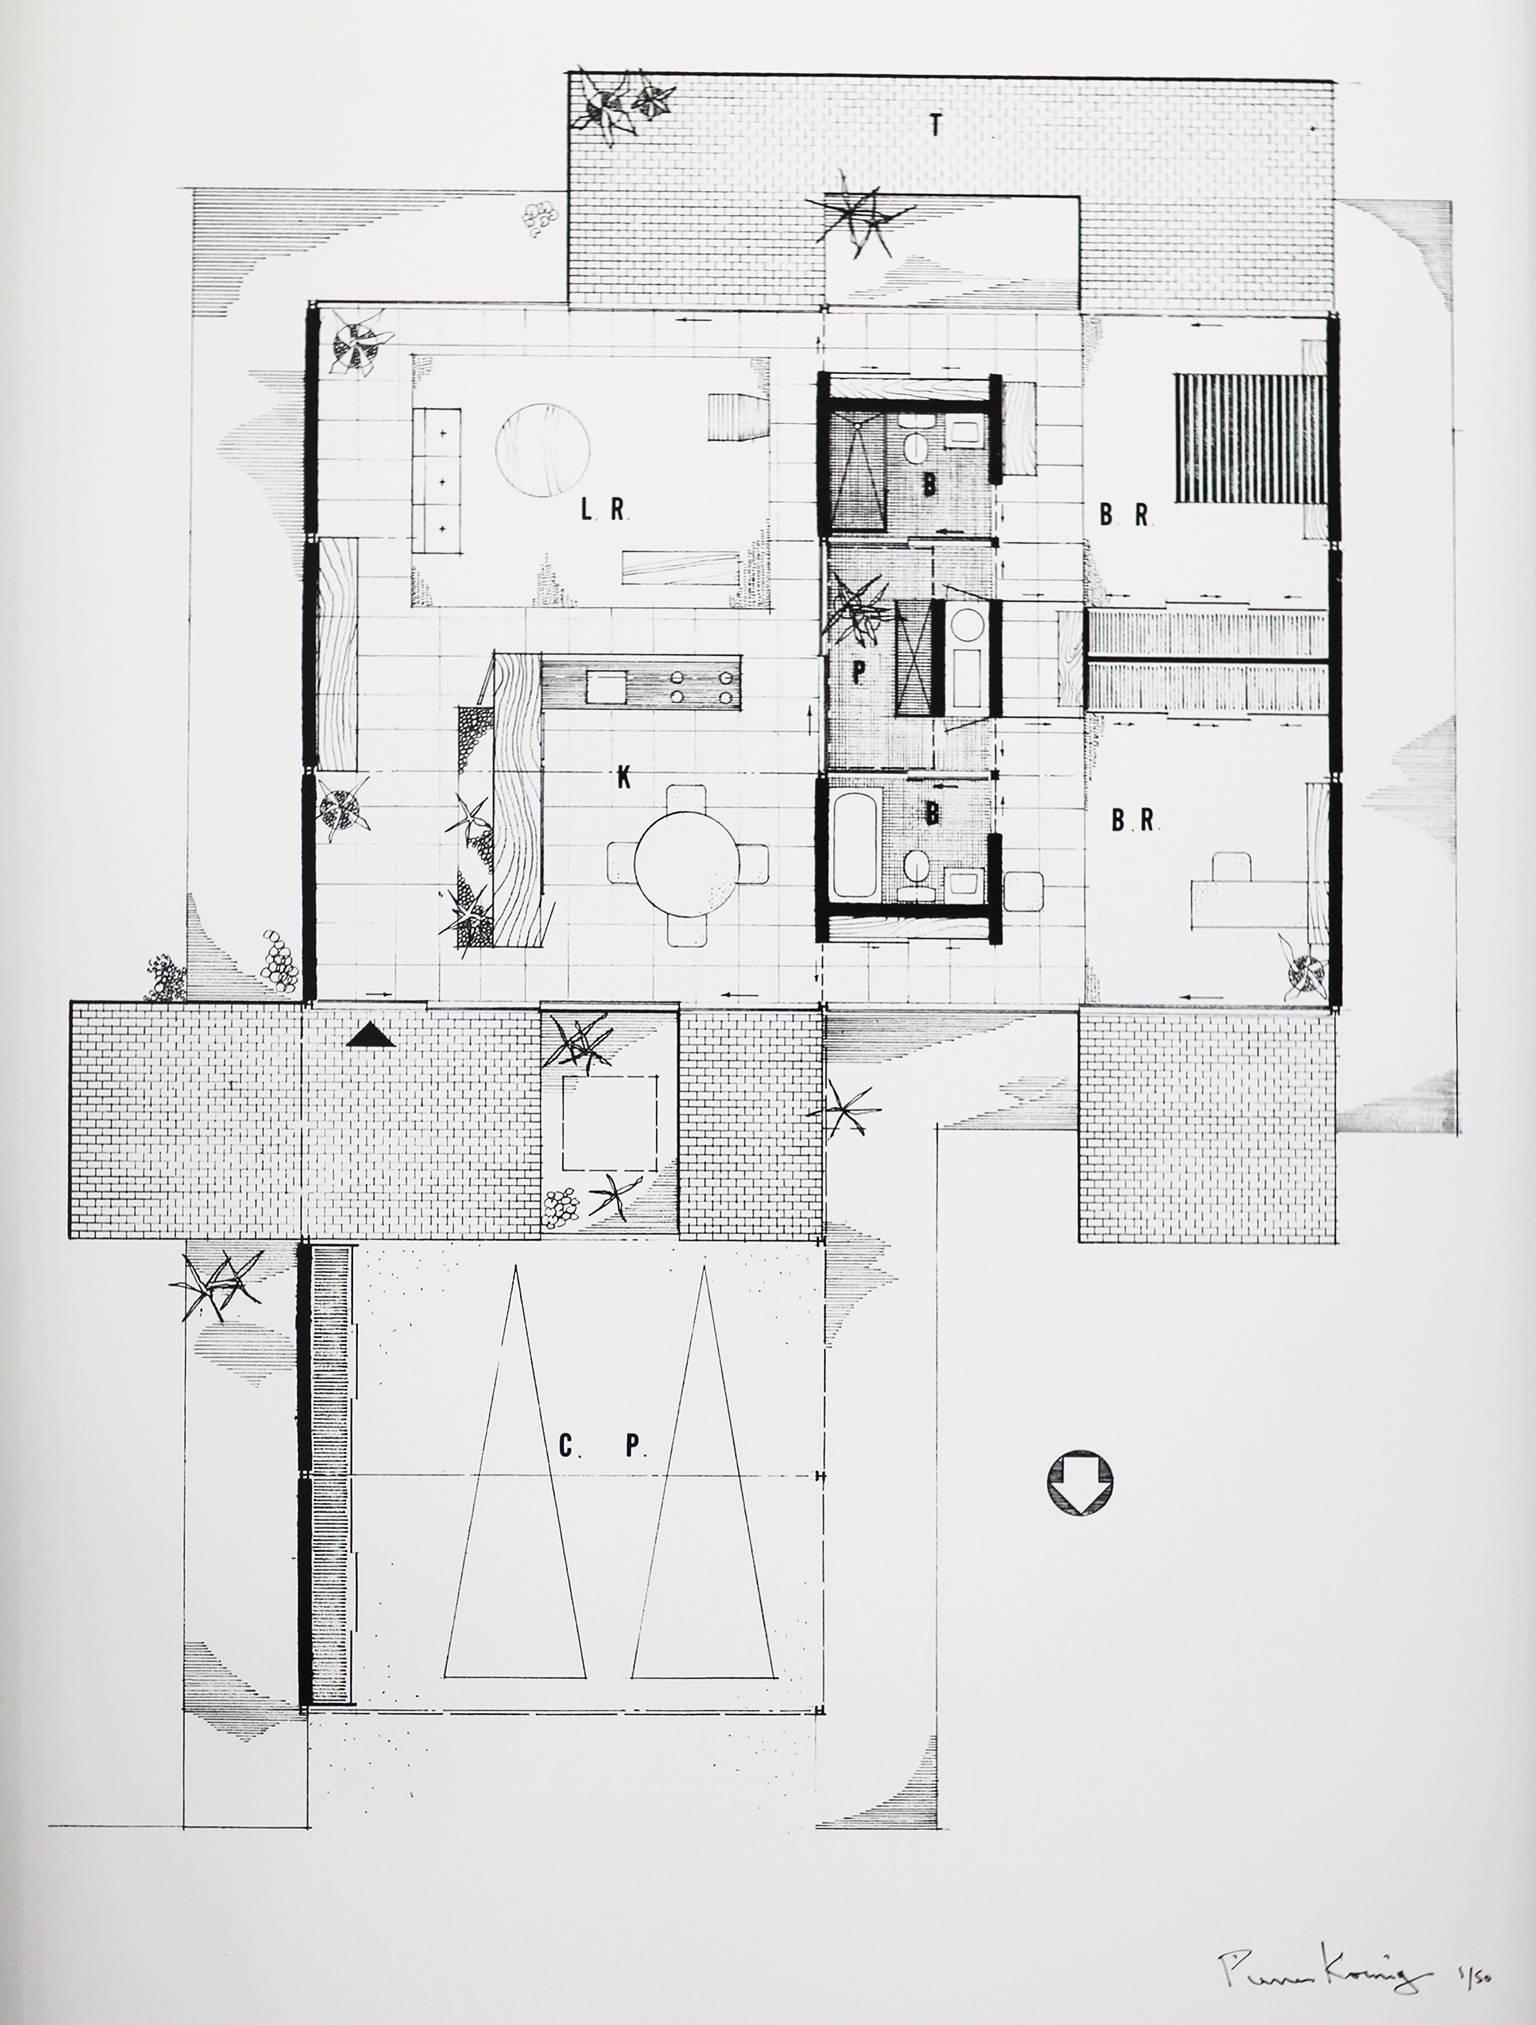 Pierre Koenig
Floor plan of Case Study House 21, 1958
Photographic print from original line negative
Signed, edition 1/50
The Bailey House, Los Angeles, California
Dimensions including frame: 30 high x 20 wide x 1.5 deep inches